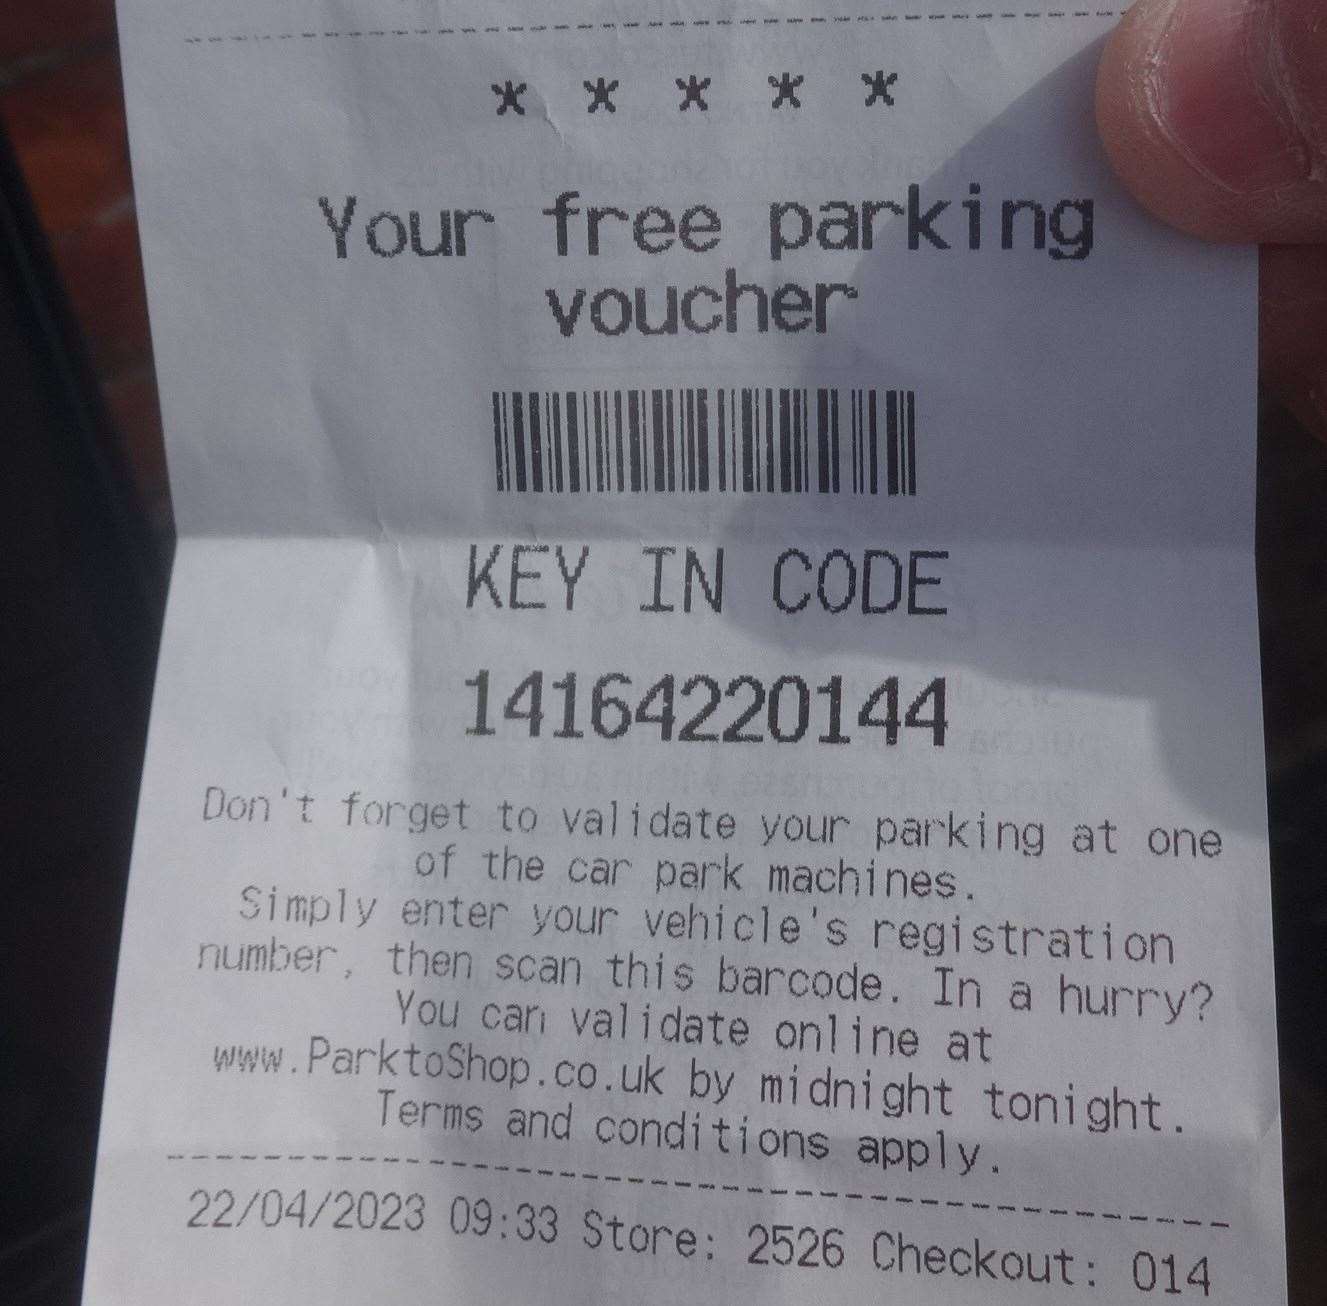 Mr Stevens received this receipt on April 22 – using the code given to validate the parking